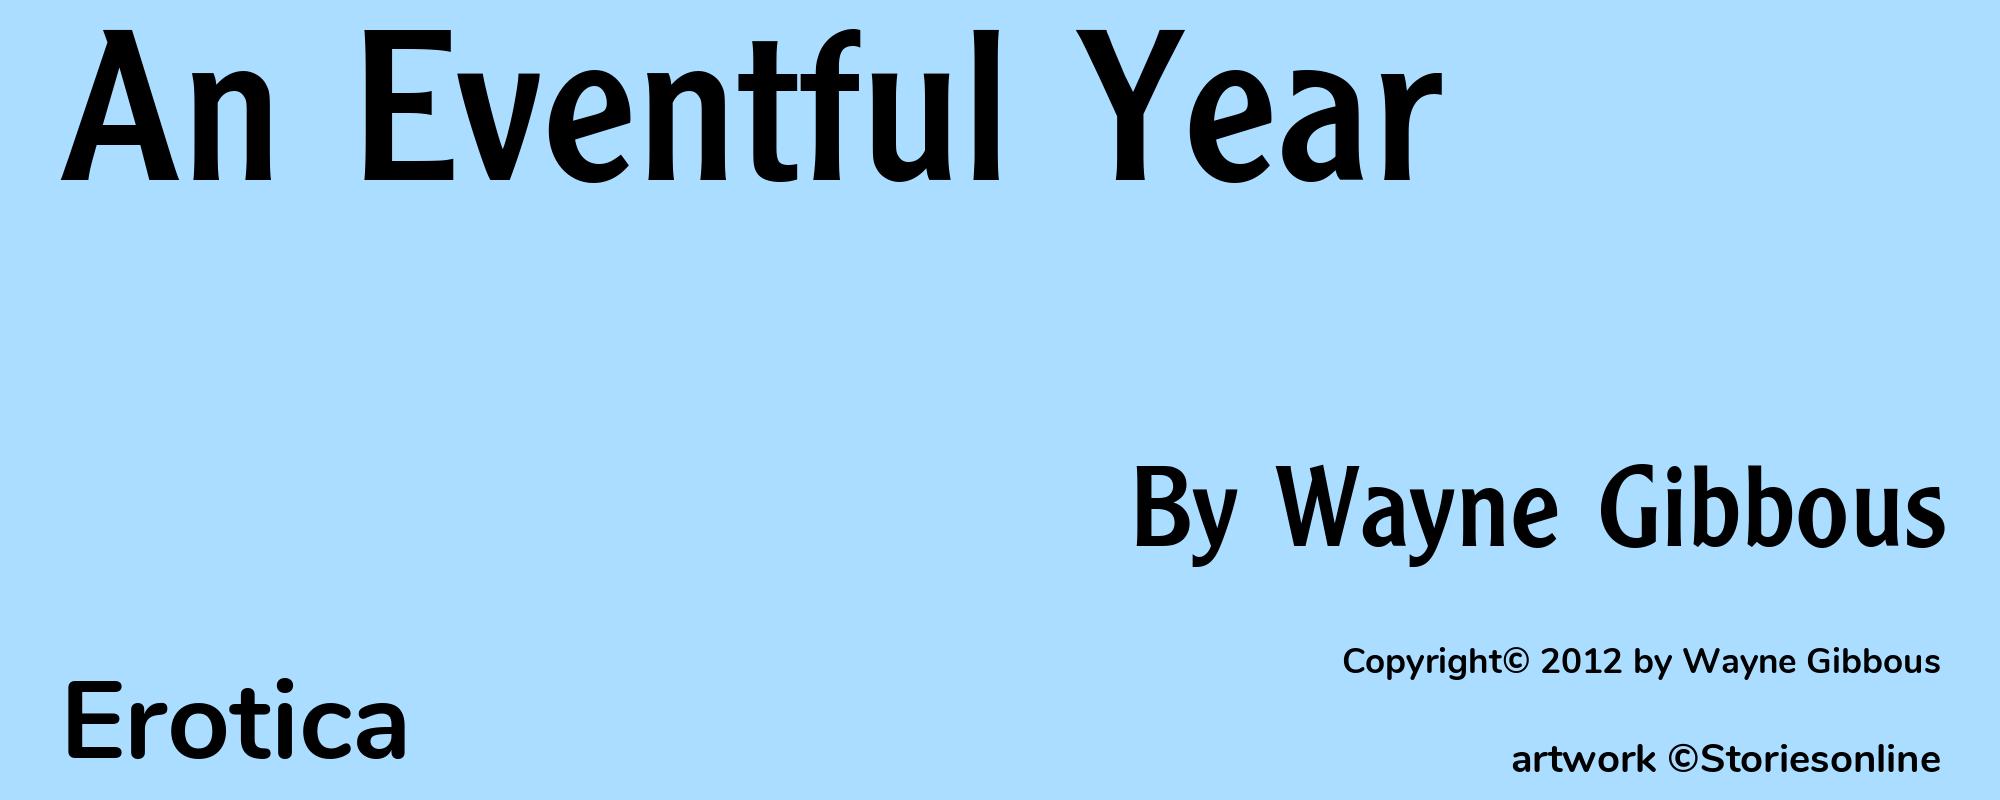 An Eventful Year - Cover